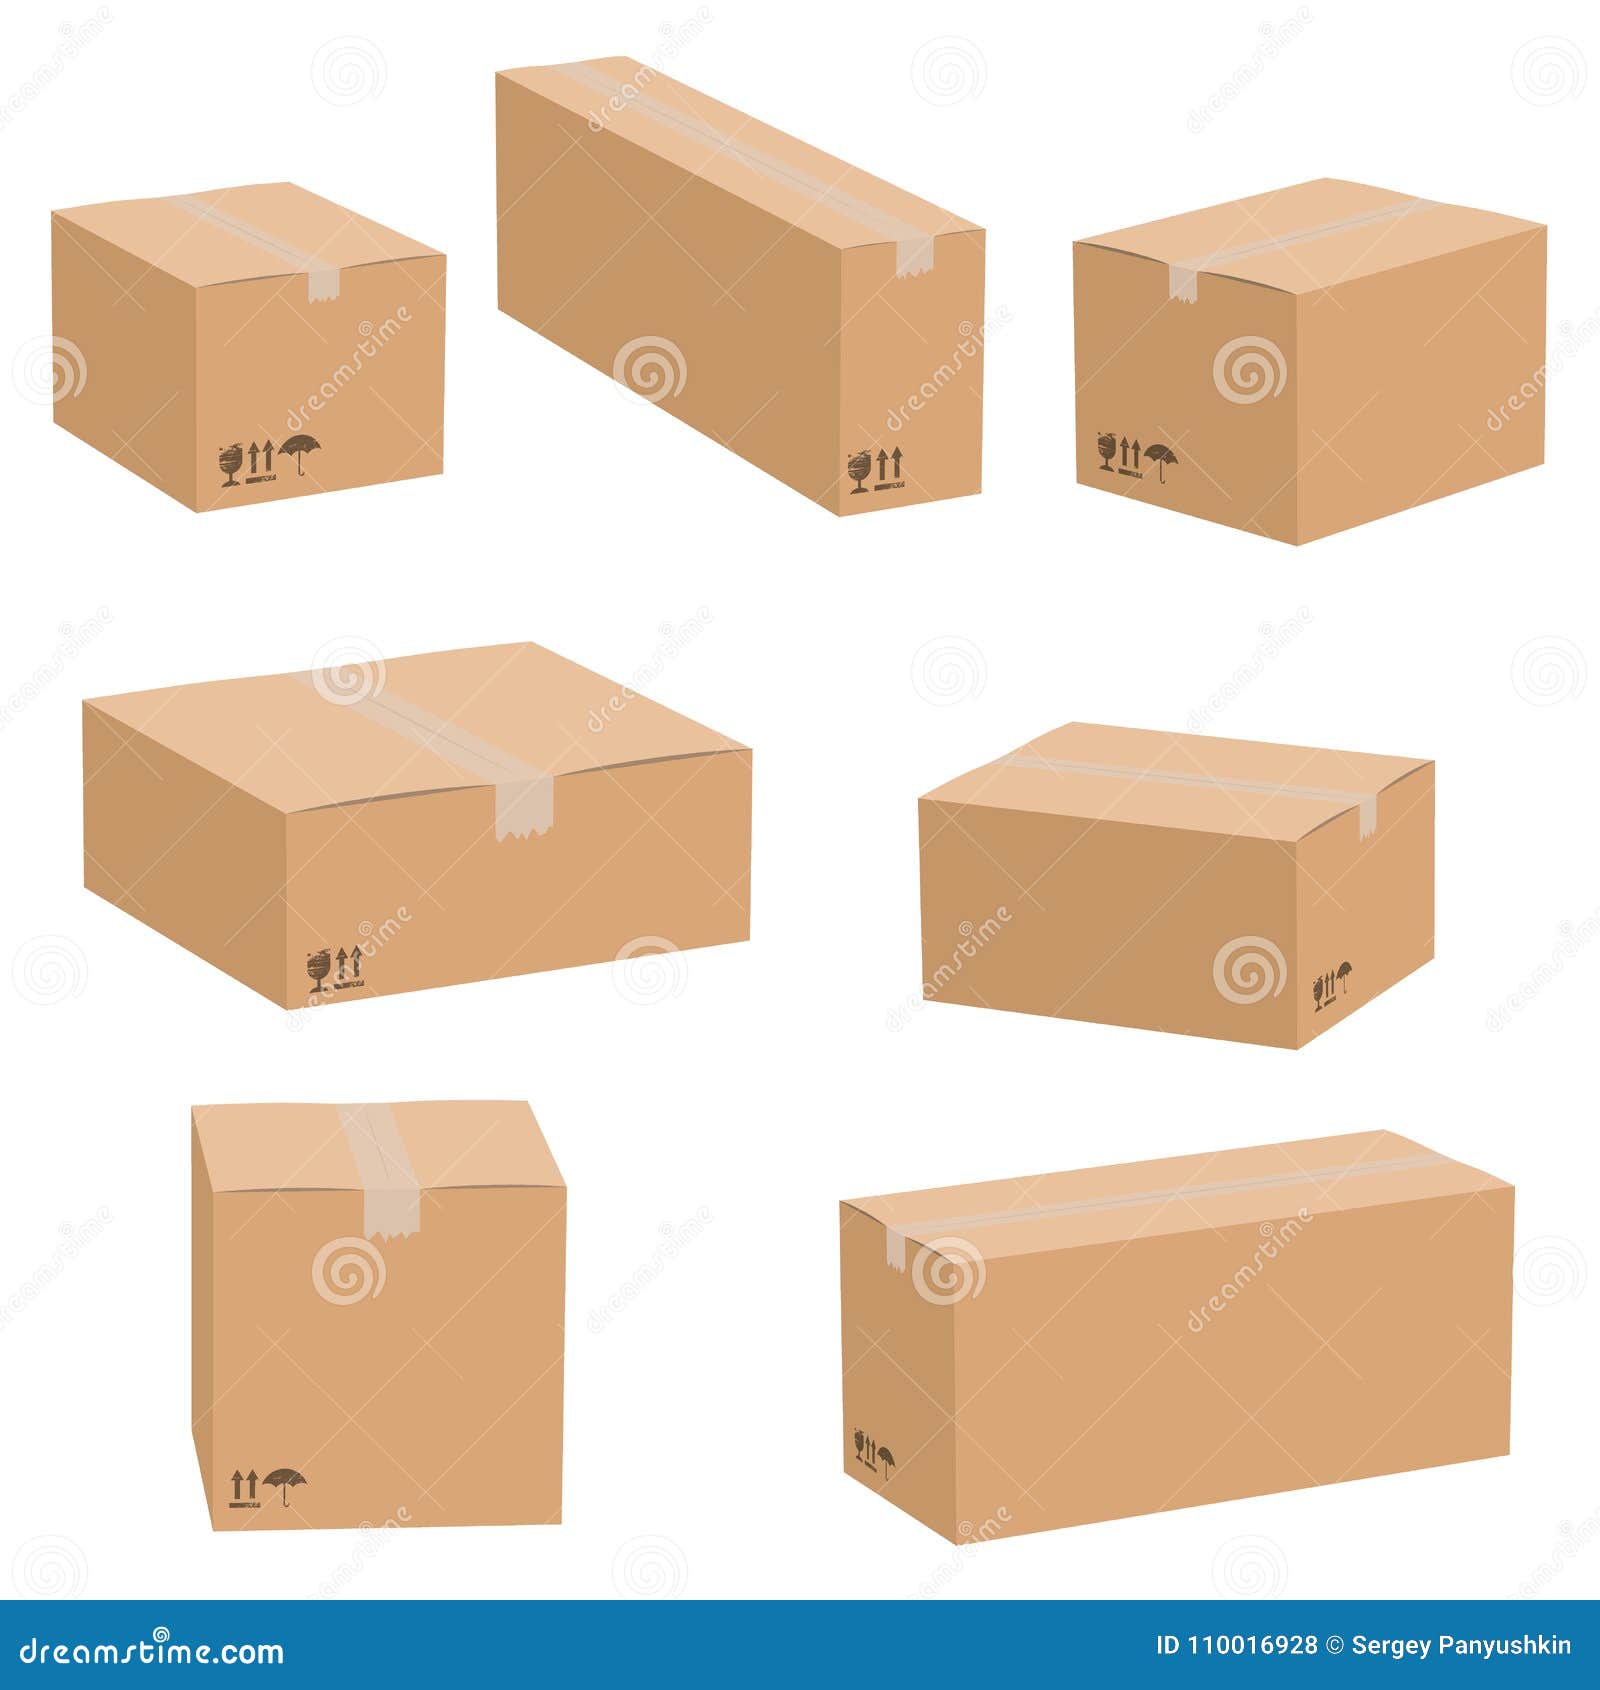 set of cardboard boxes  on white background.  carton packaging box.